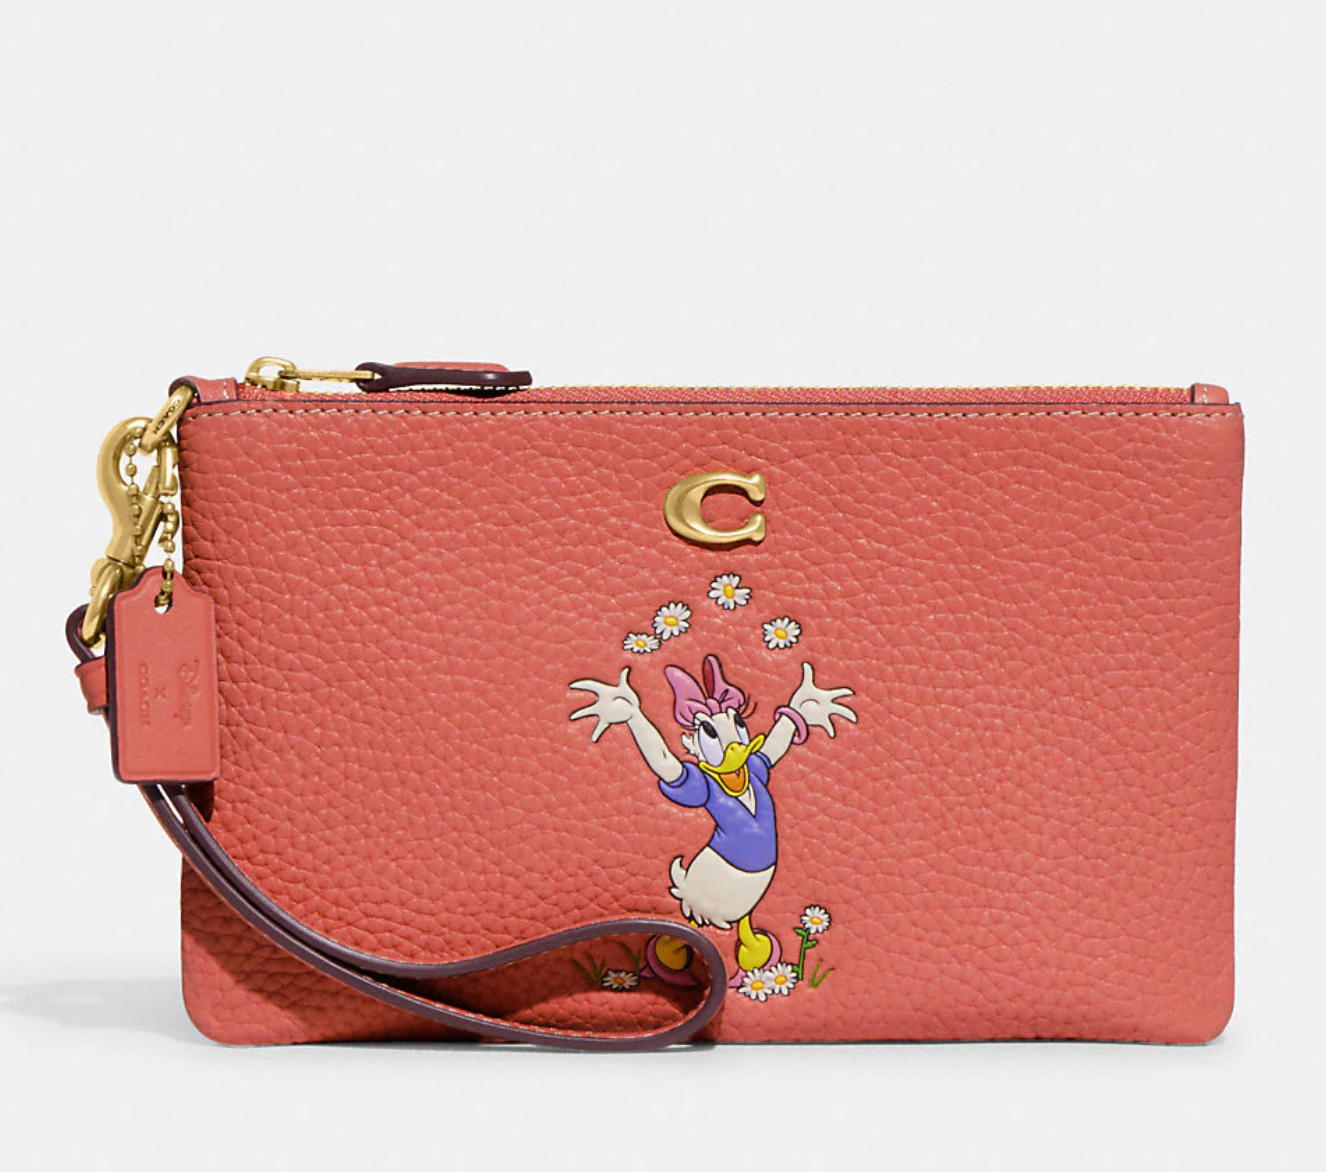 Take A Sneak Peek Of The Disney x Coach Outlet Minnie Mouse Collection  Releasing On May 15th | Disney purse, Disney handbags, Disney bag